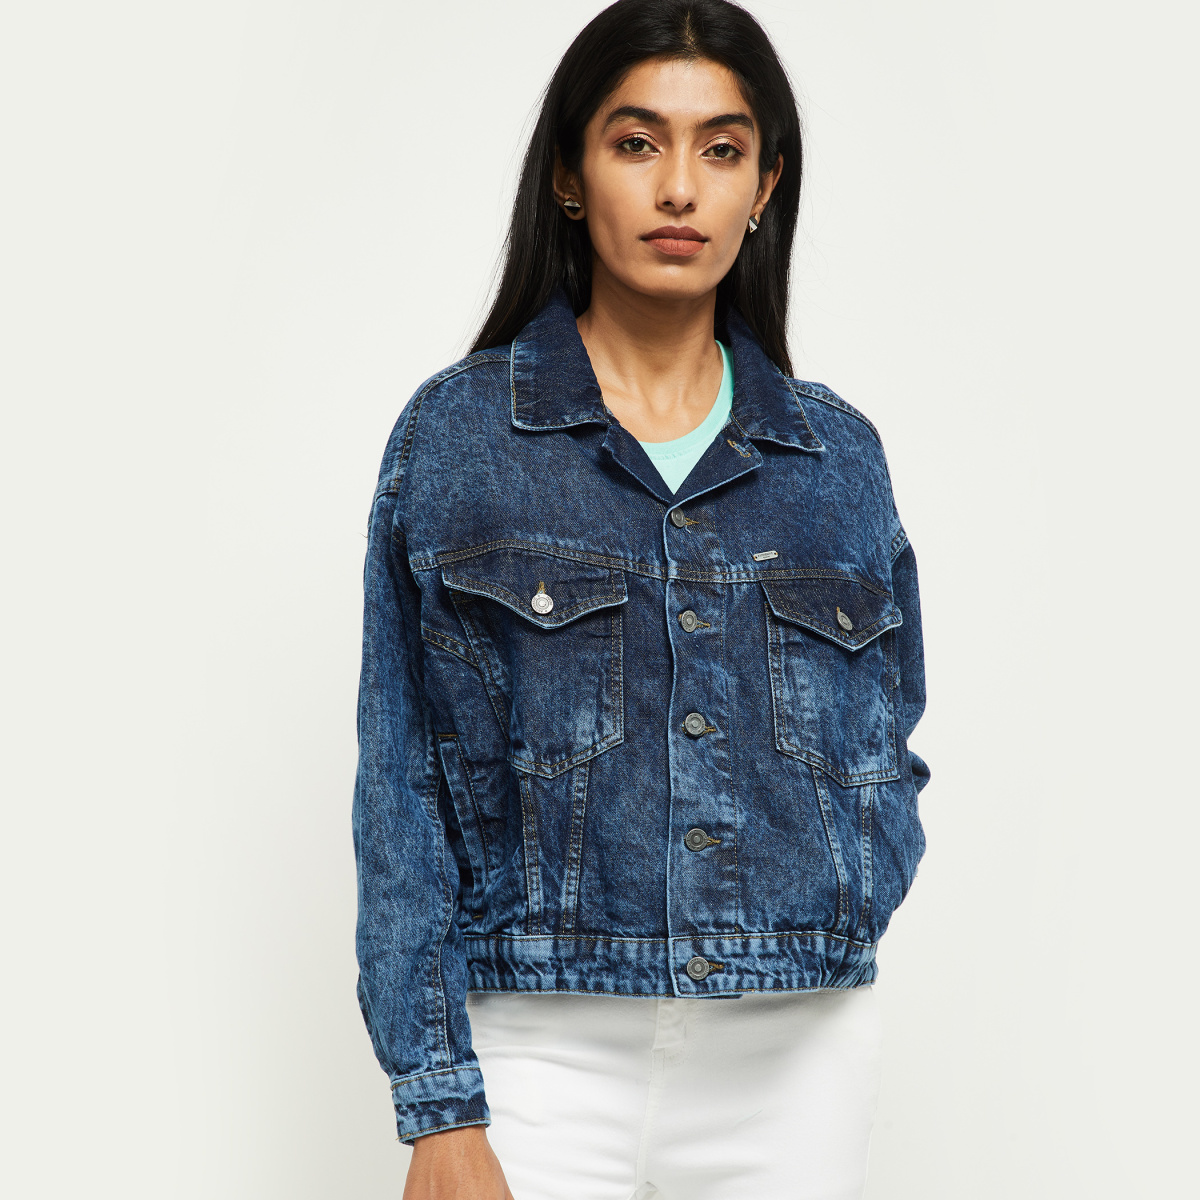 red craft Full Sleeve Washed Women Denim Jacket - Buy red craft Full Sleeve Washed  Women Denim Jacket Online at Best Prices in India | Flipkart.com